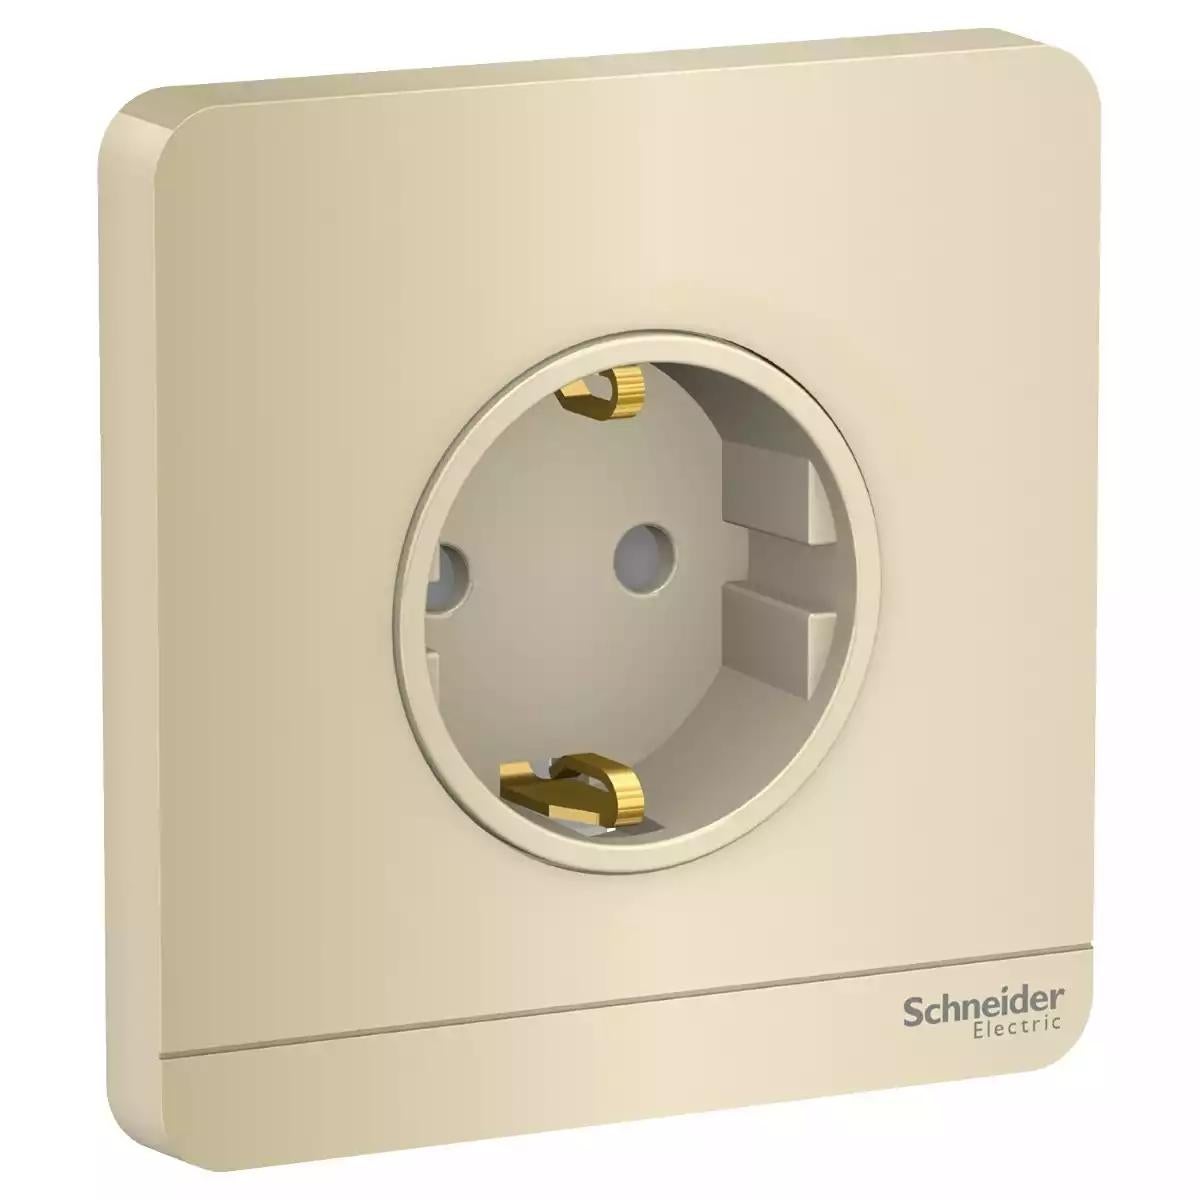 Schneider Electric AvatarOn socket-outlet, 16A, 2P+earth, Schuko, Wine Gold